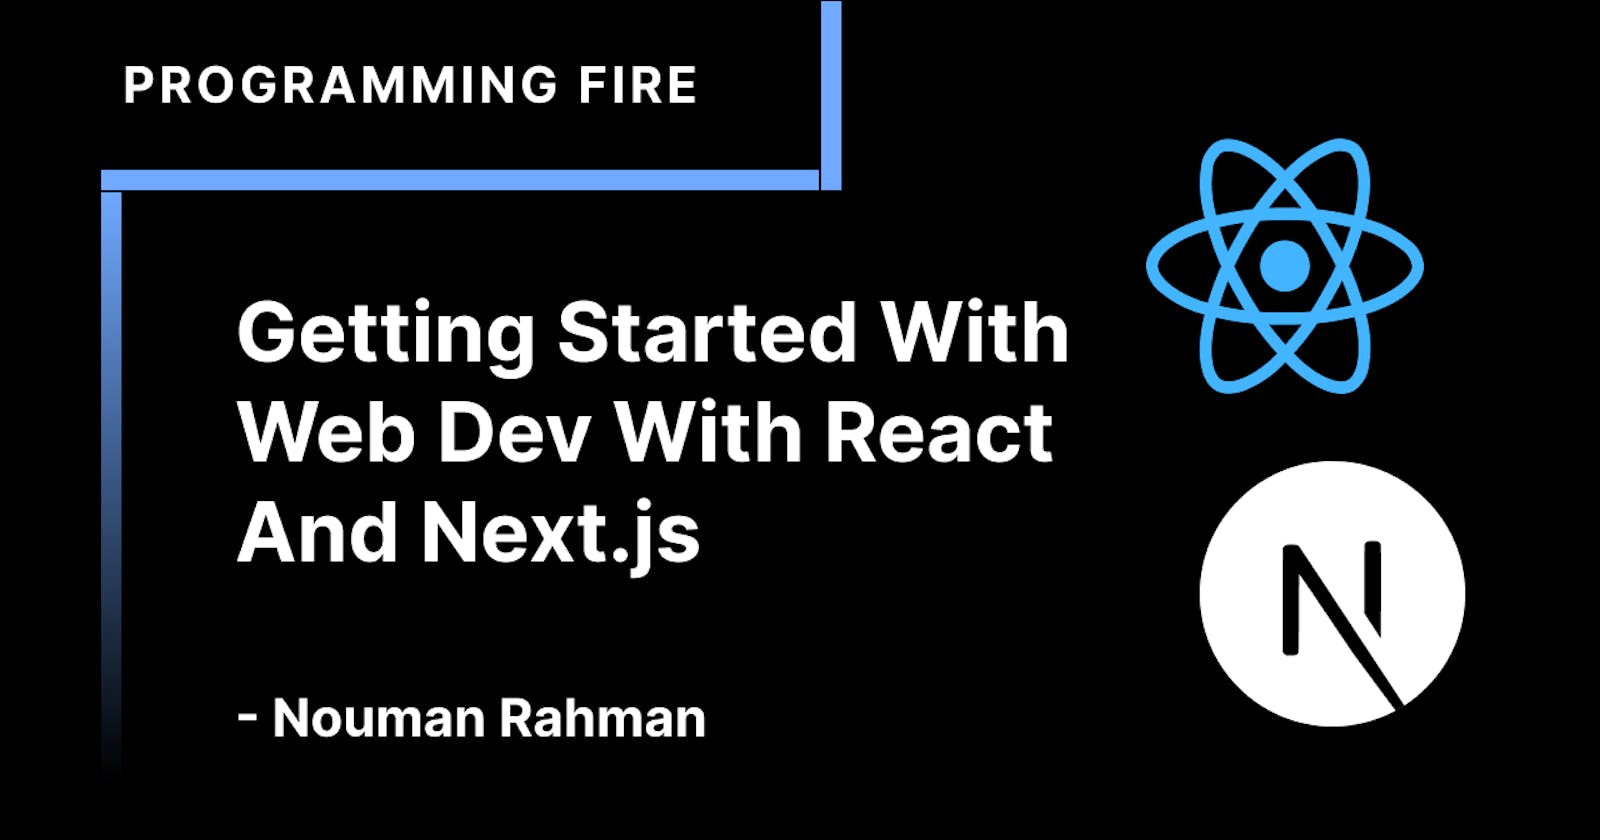 Getting started with Web Development with React and Next.js